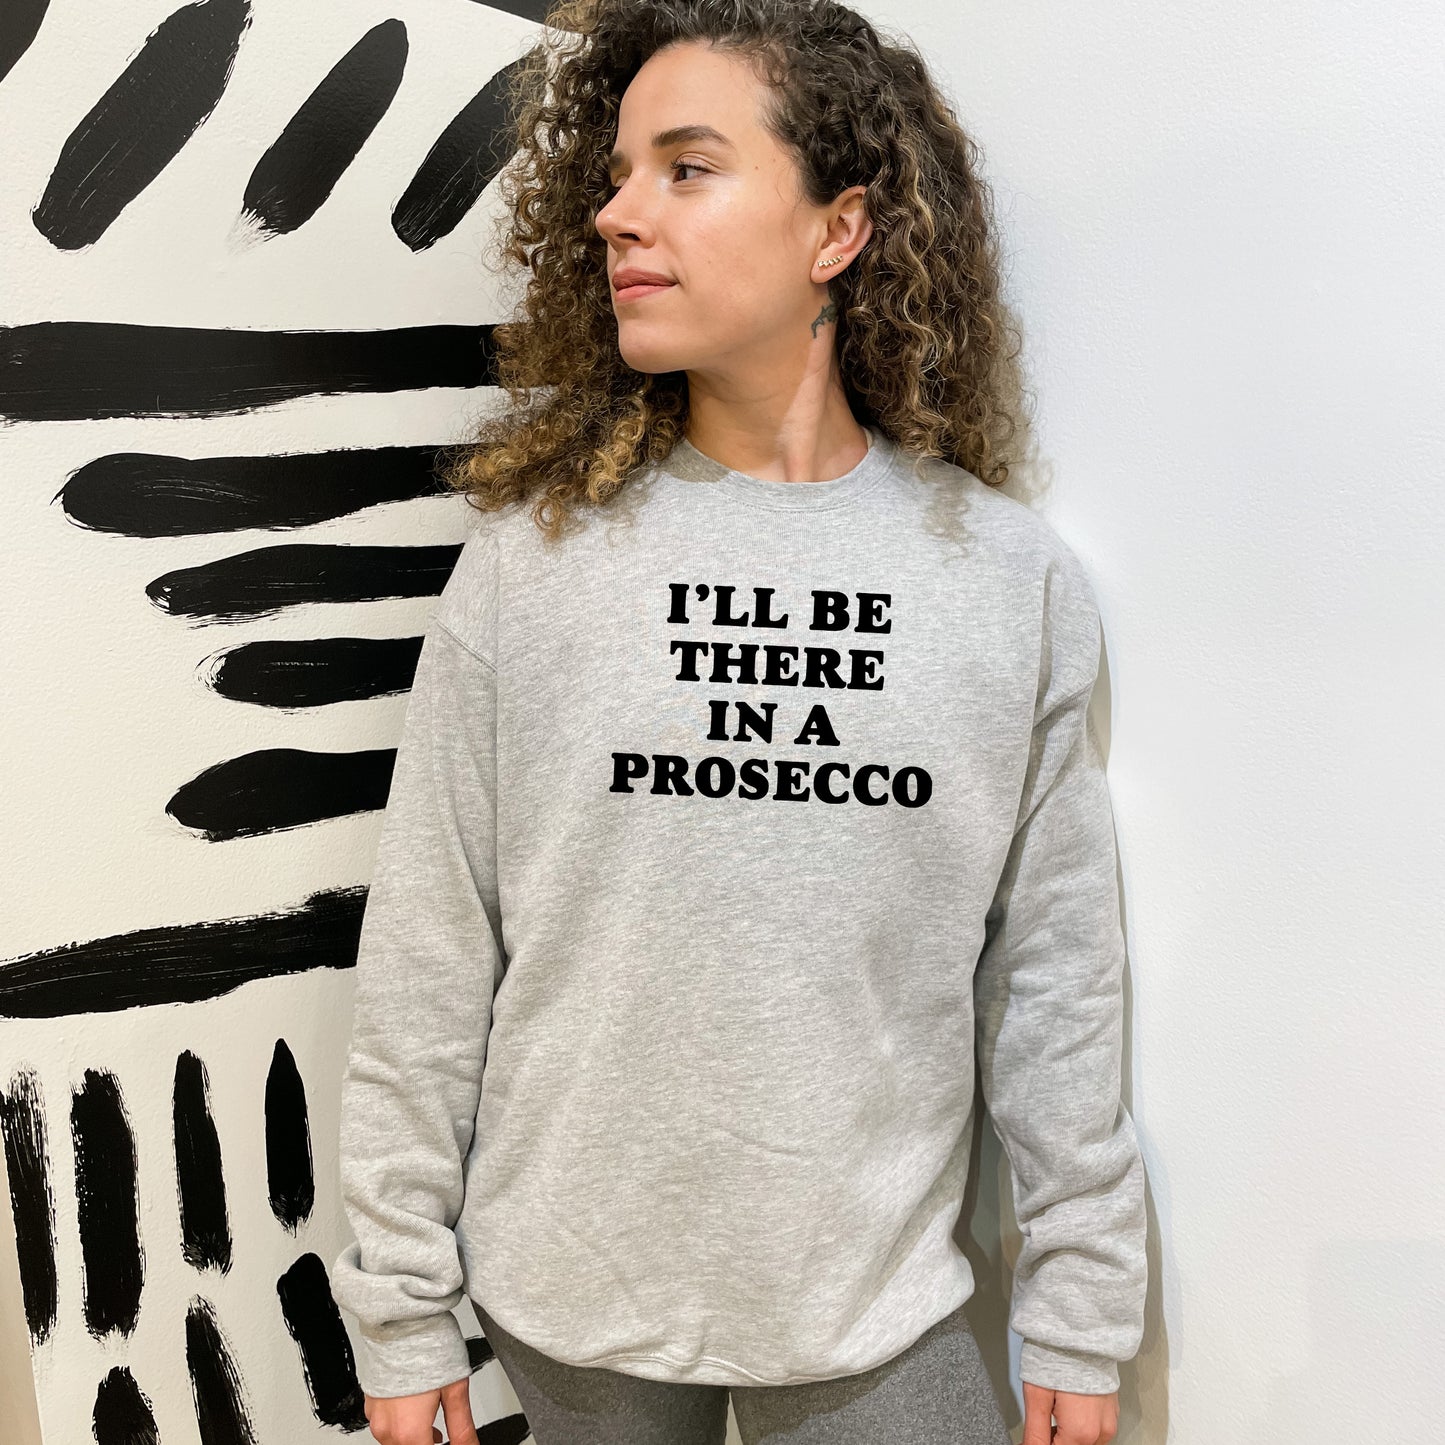 I'll Be There In a Prosecco - Bold Type - Unisex Sweatshirt - Heather Gray or Dusty Blue